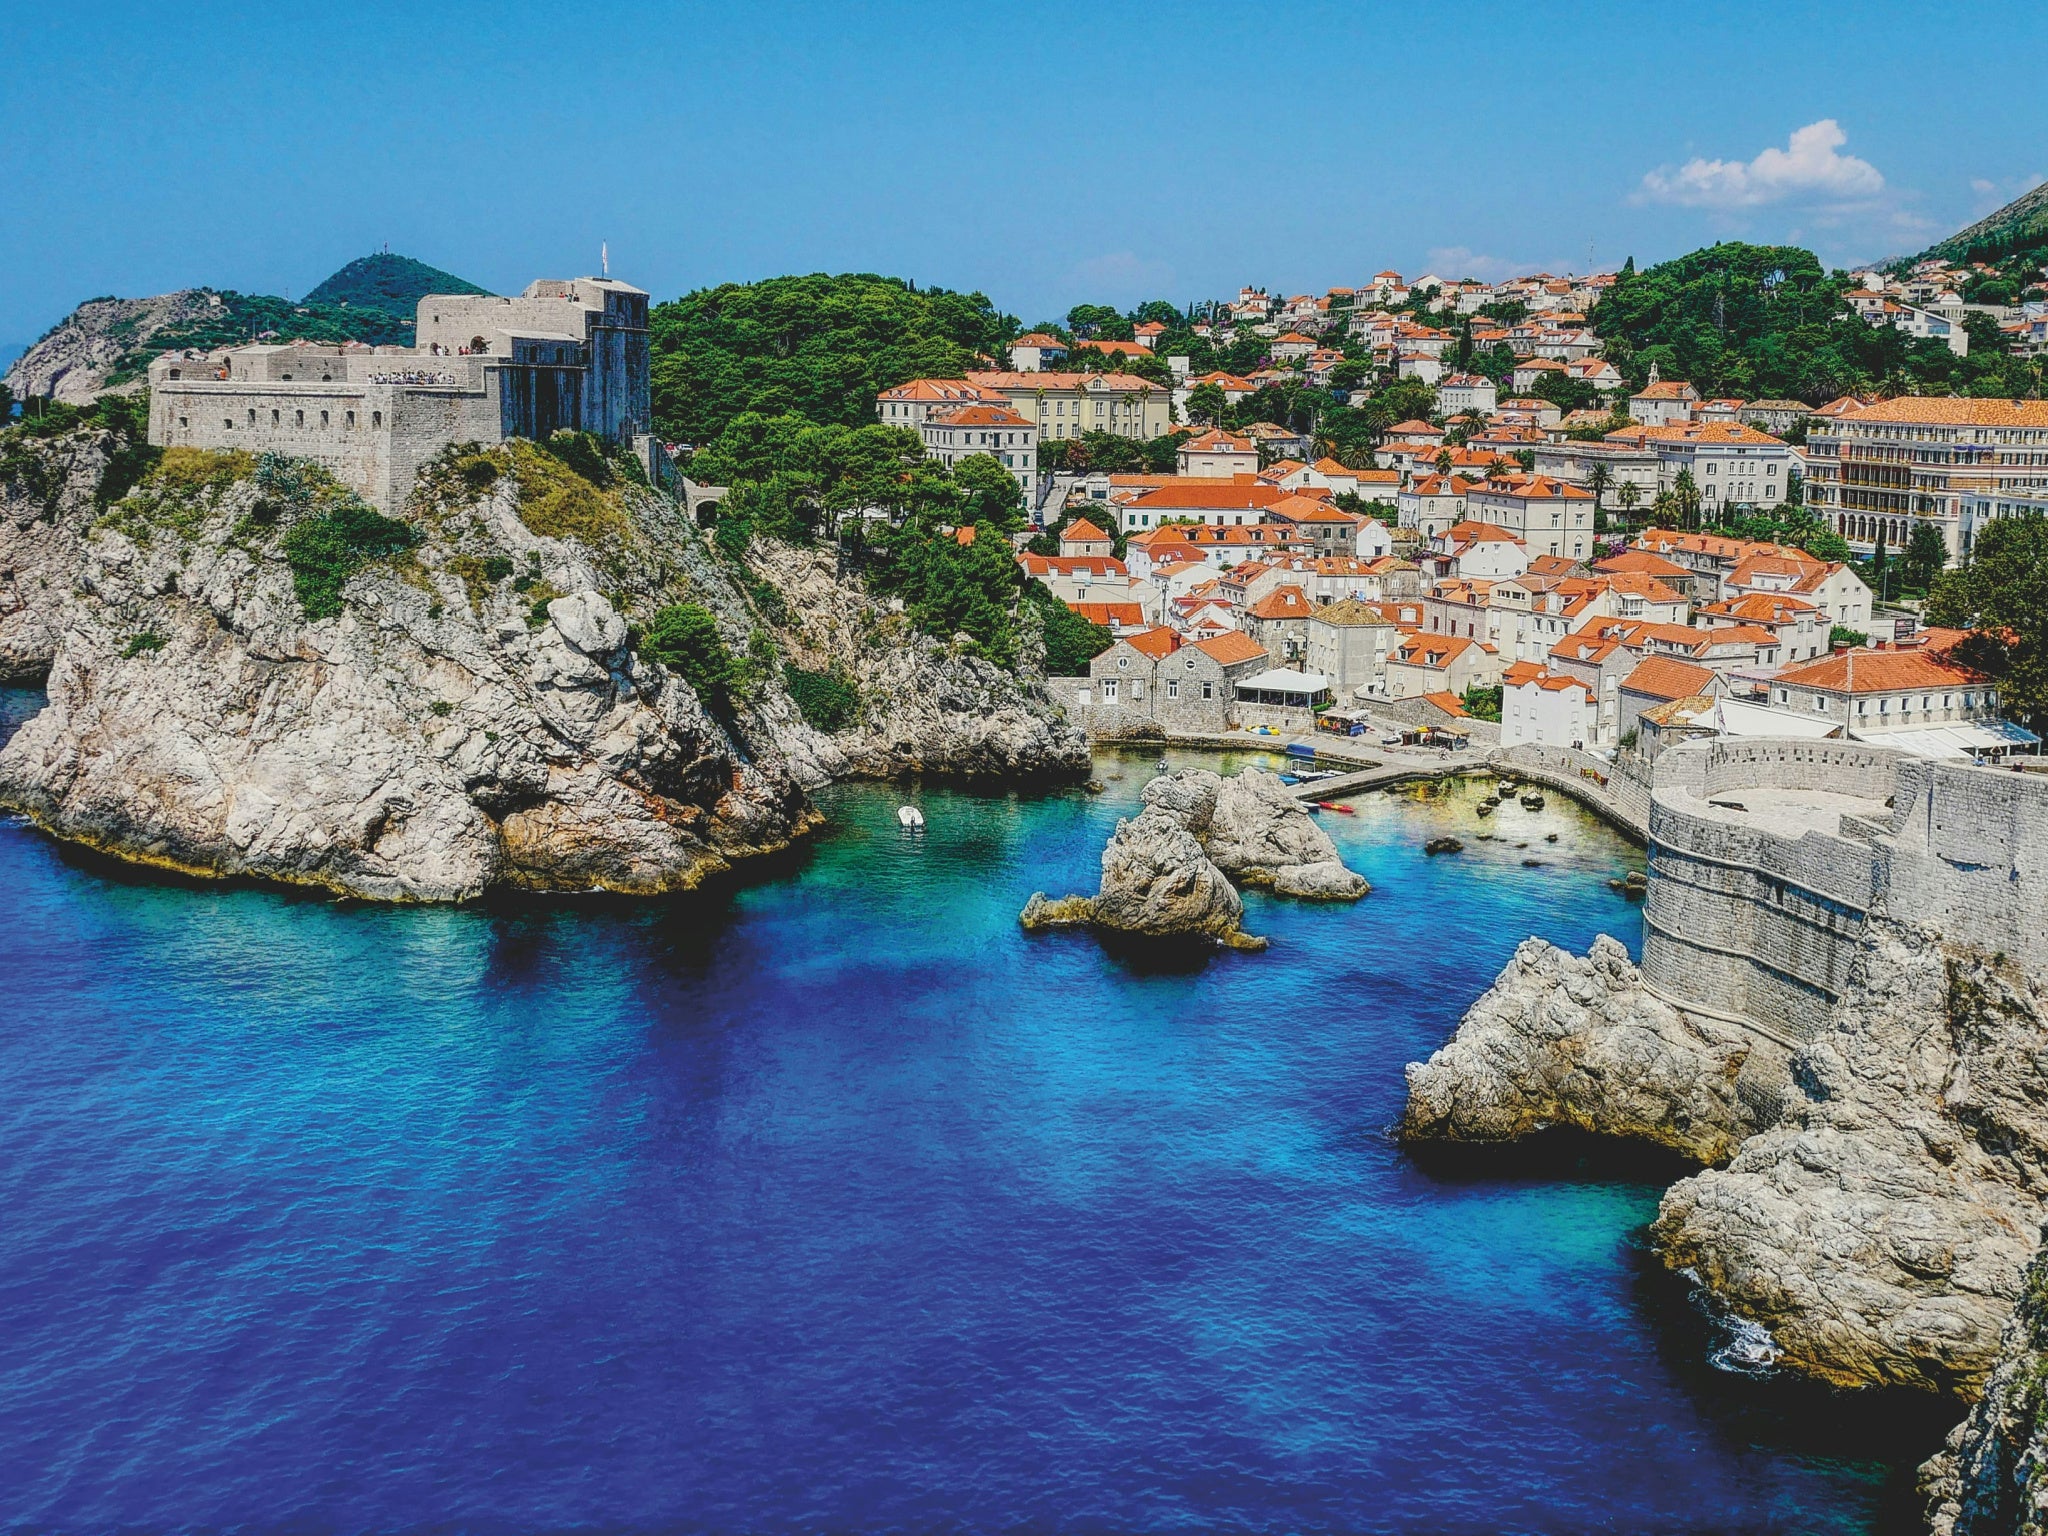 See the walls of Dubrovnik from the comfort of your cabin